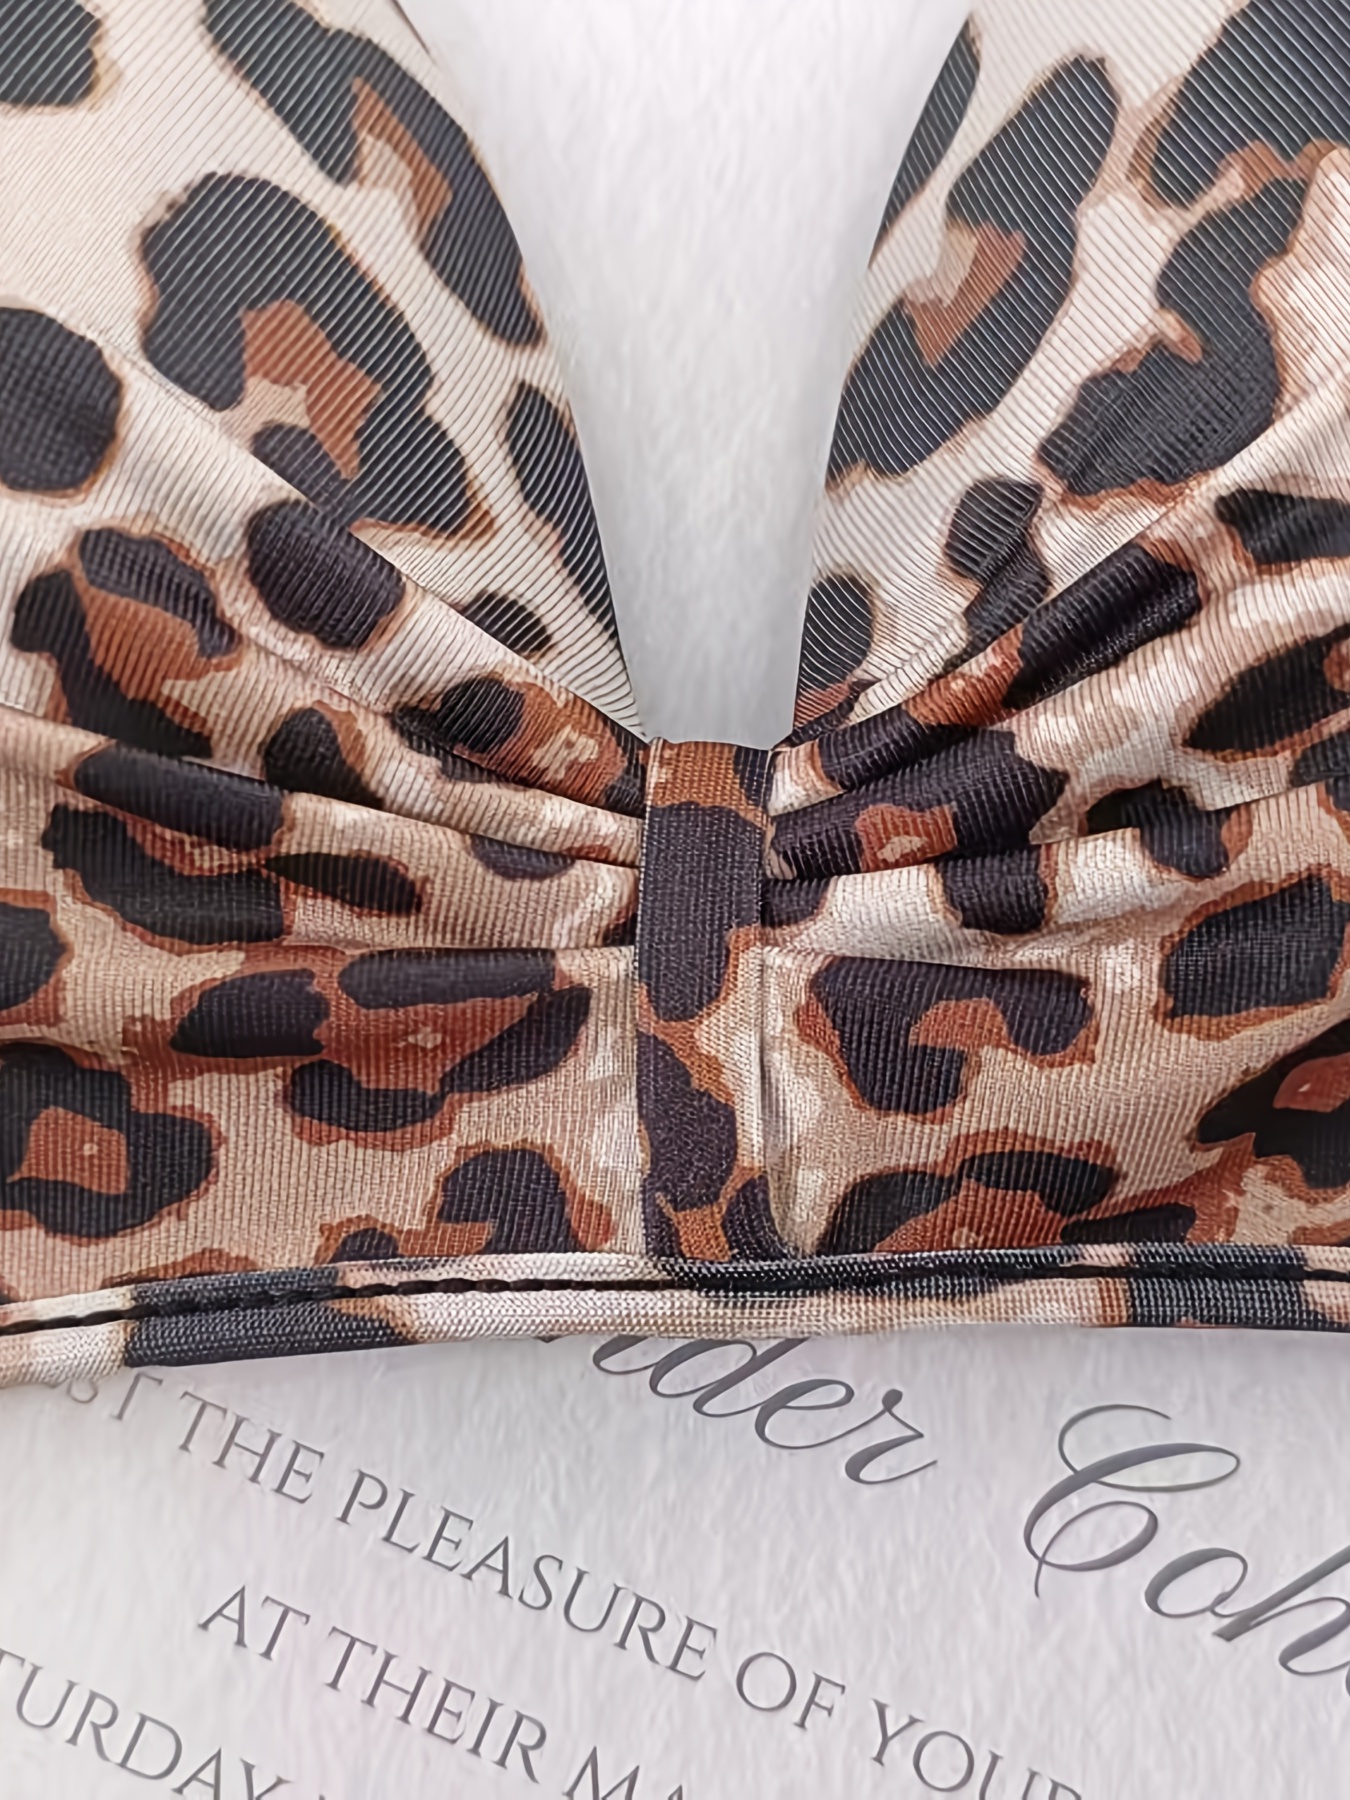 Add Two Cups Push Up Bra Padded—Leopard print